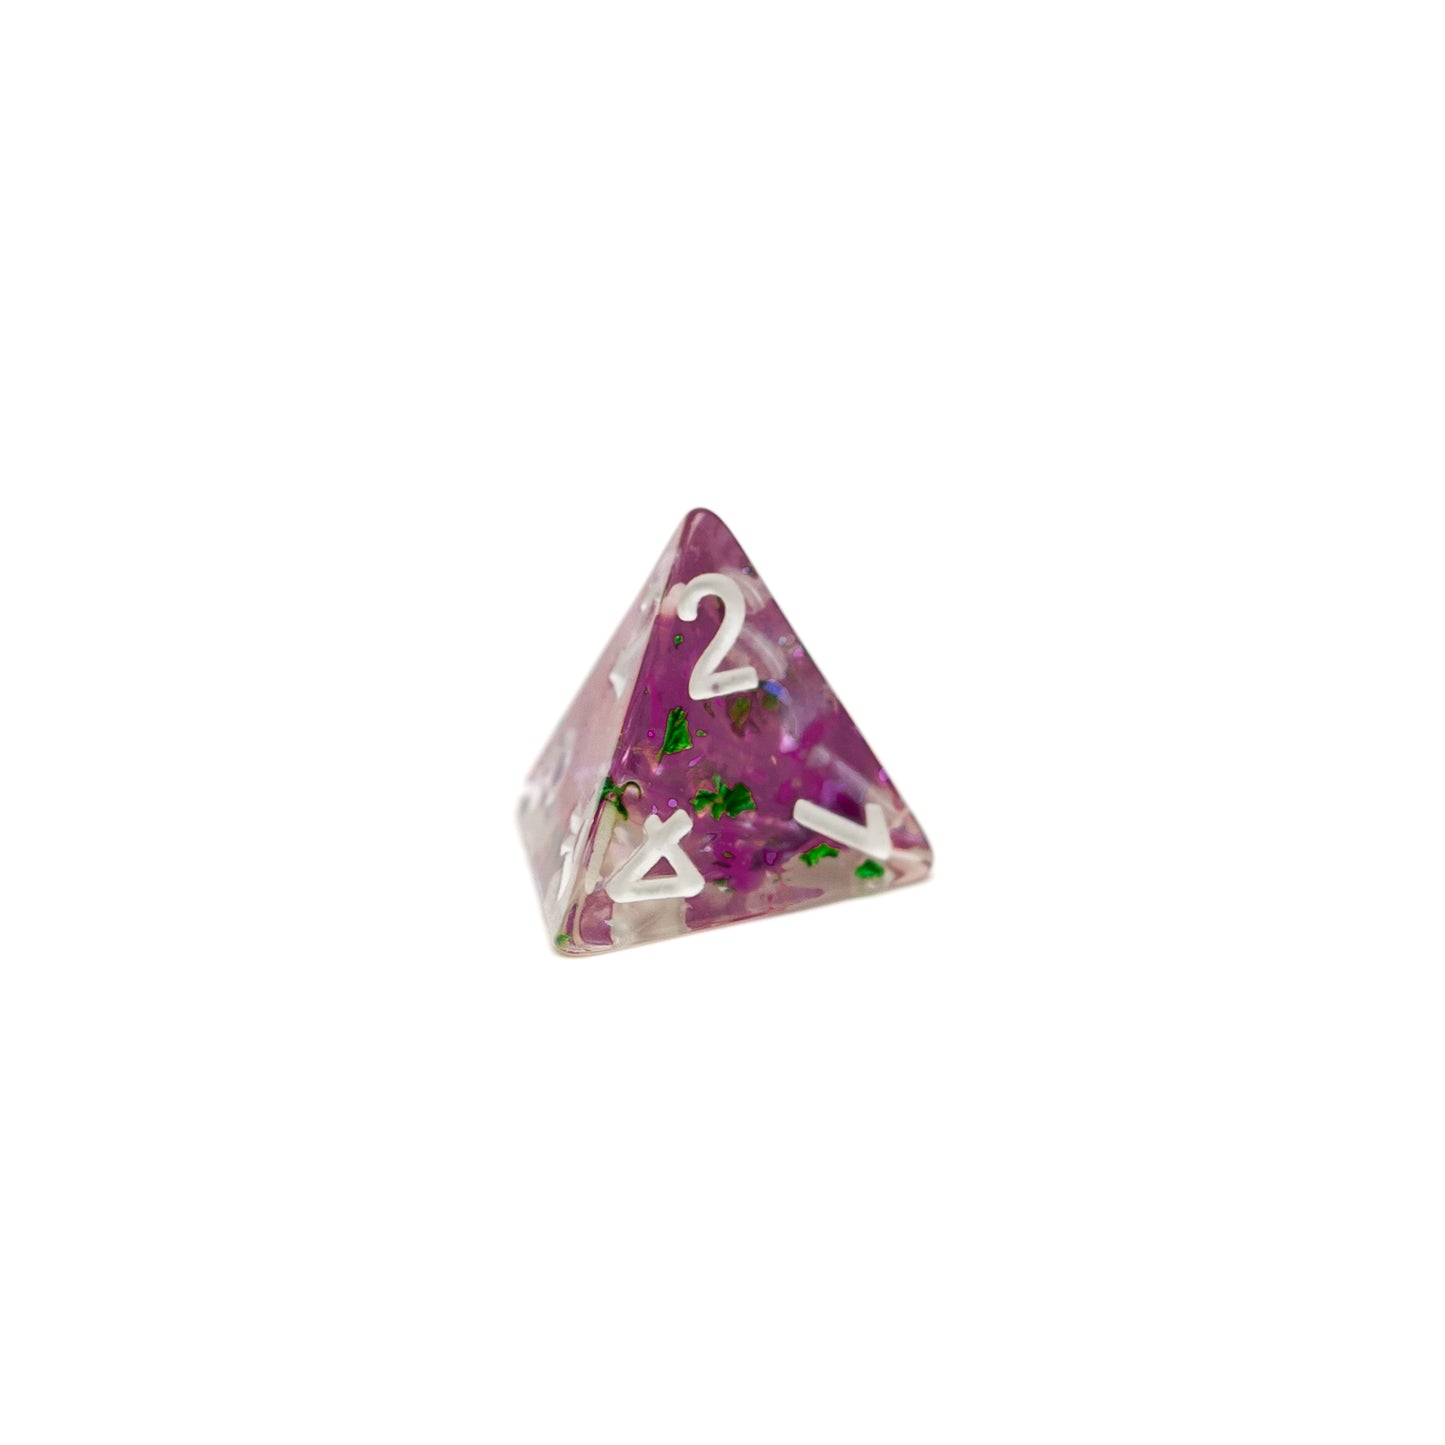 Roll Britannia Malrus and Milo Tosscobble Dungeons and Dragons D4 Dice with Swirling Purple and Green Glitter Aesthetic